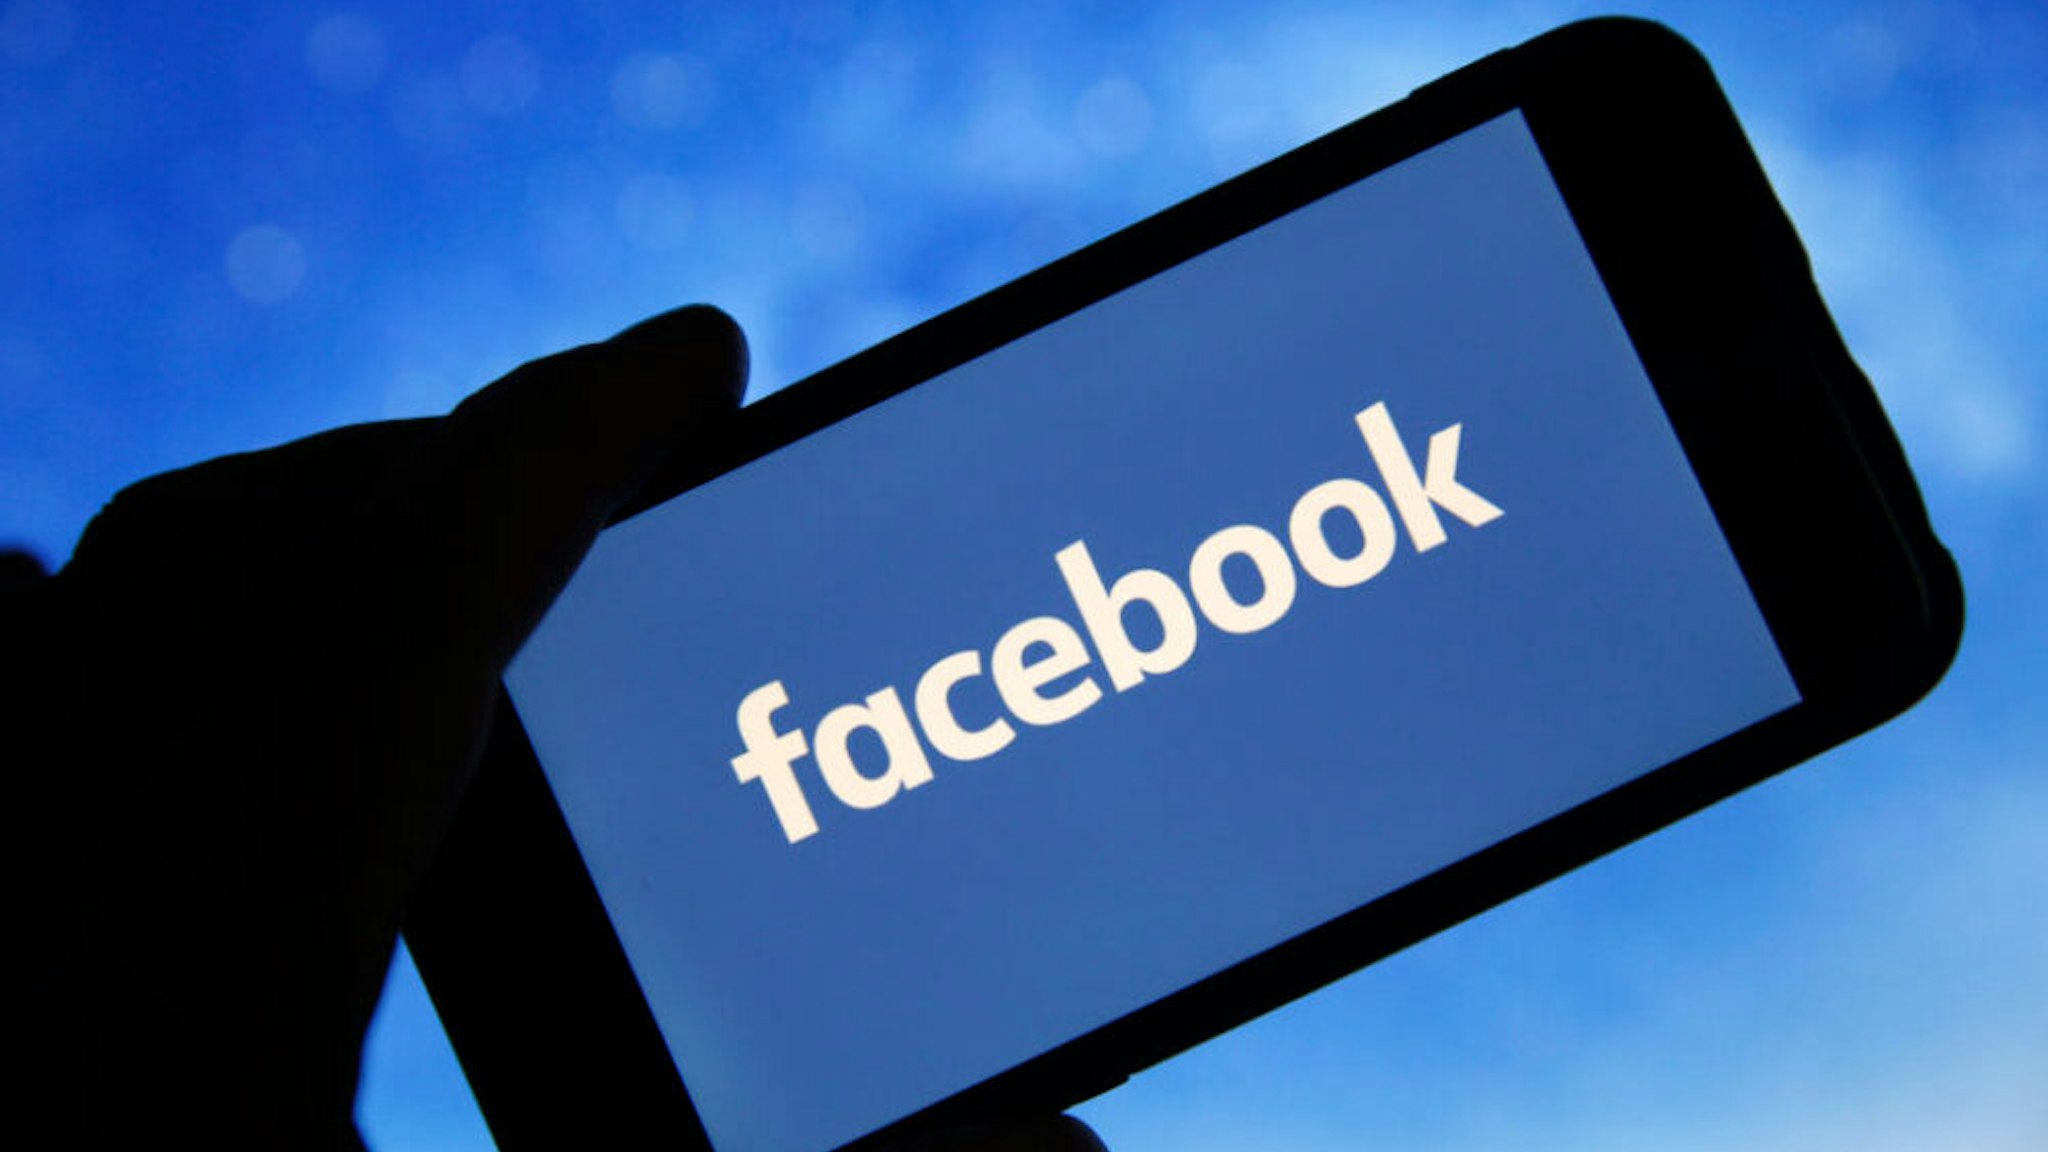 PARIS, FRANCE - JANUARY 31: In this photo illustration the Facebook logo is seen on the screen of an iPhone on January 31, 2019 in Paris, France. The social media Facebook revealed to have paid teenagers to watch their activities on their phone. The company has offered Internet users to download the application "Facebook Research" to observe all their deeds and actions, against payment. Despite this, Facebook shares soar by 11% in the wake of the announcement of a net profit up 61% to $ 6.9 billion for the last quarter of 2018.